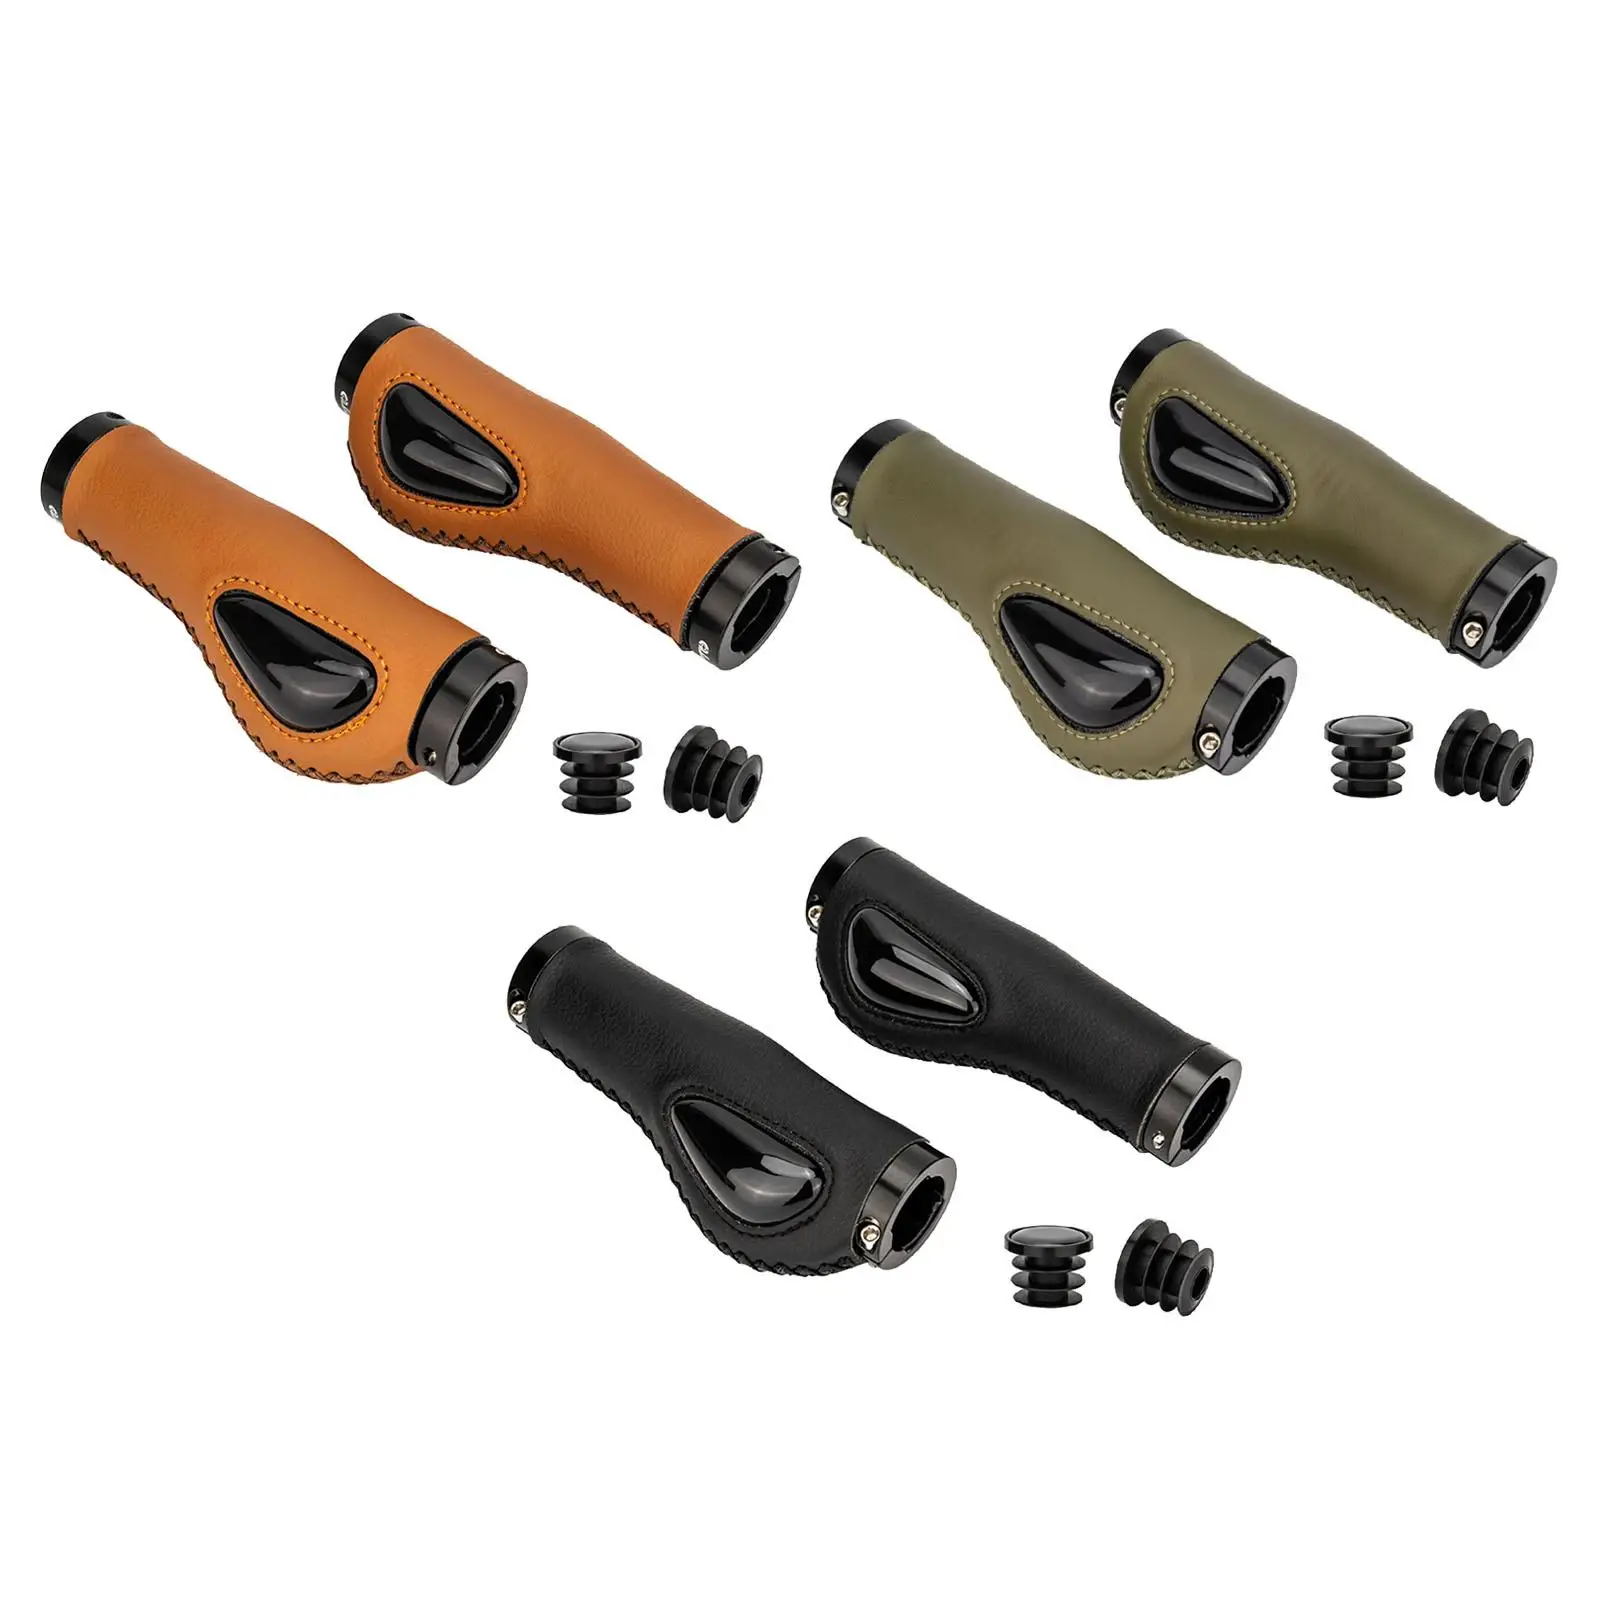 MTB Bike Handlebar Grips Shock Absorption Protection Cover for Bicycle